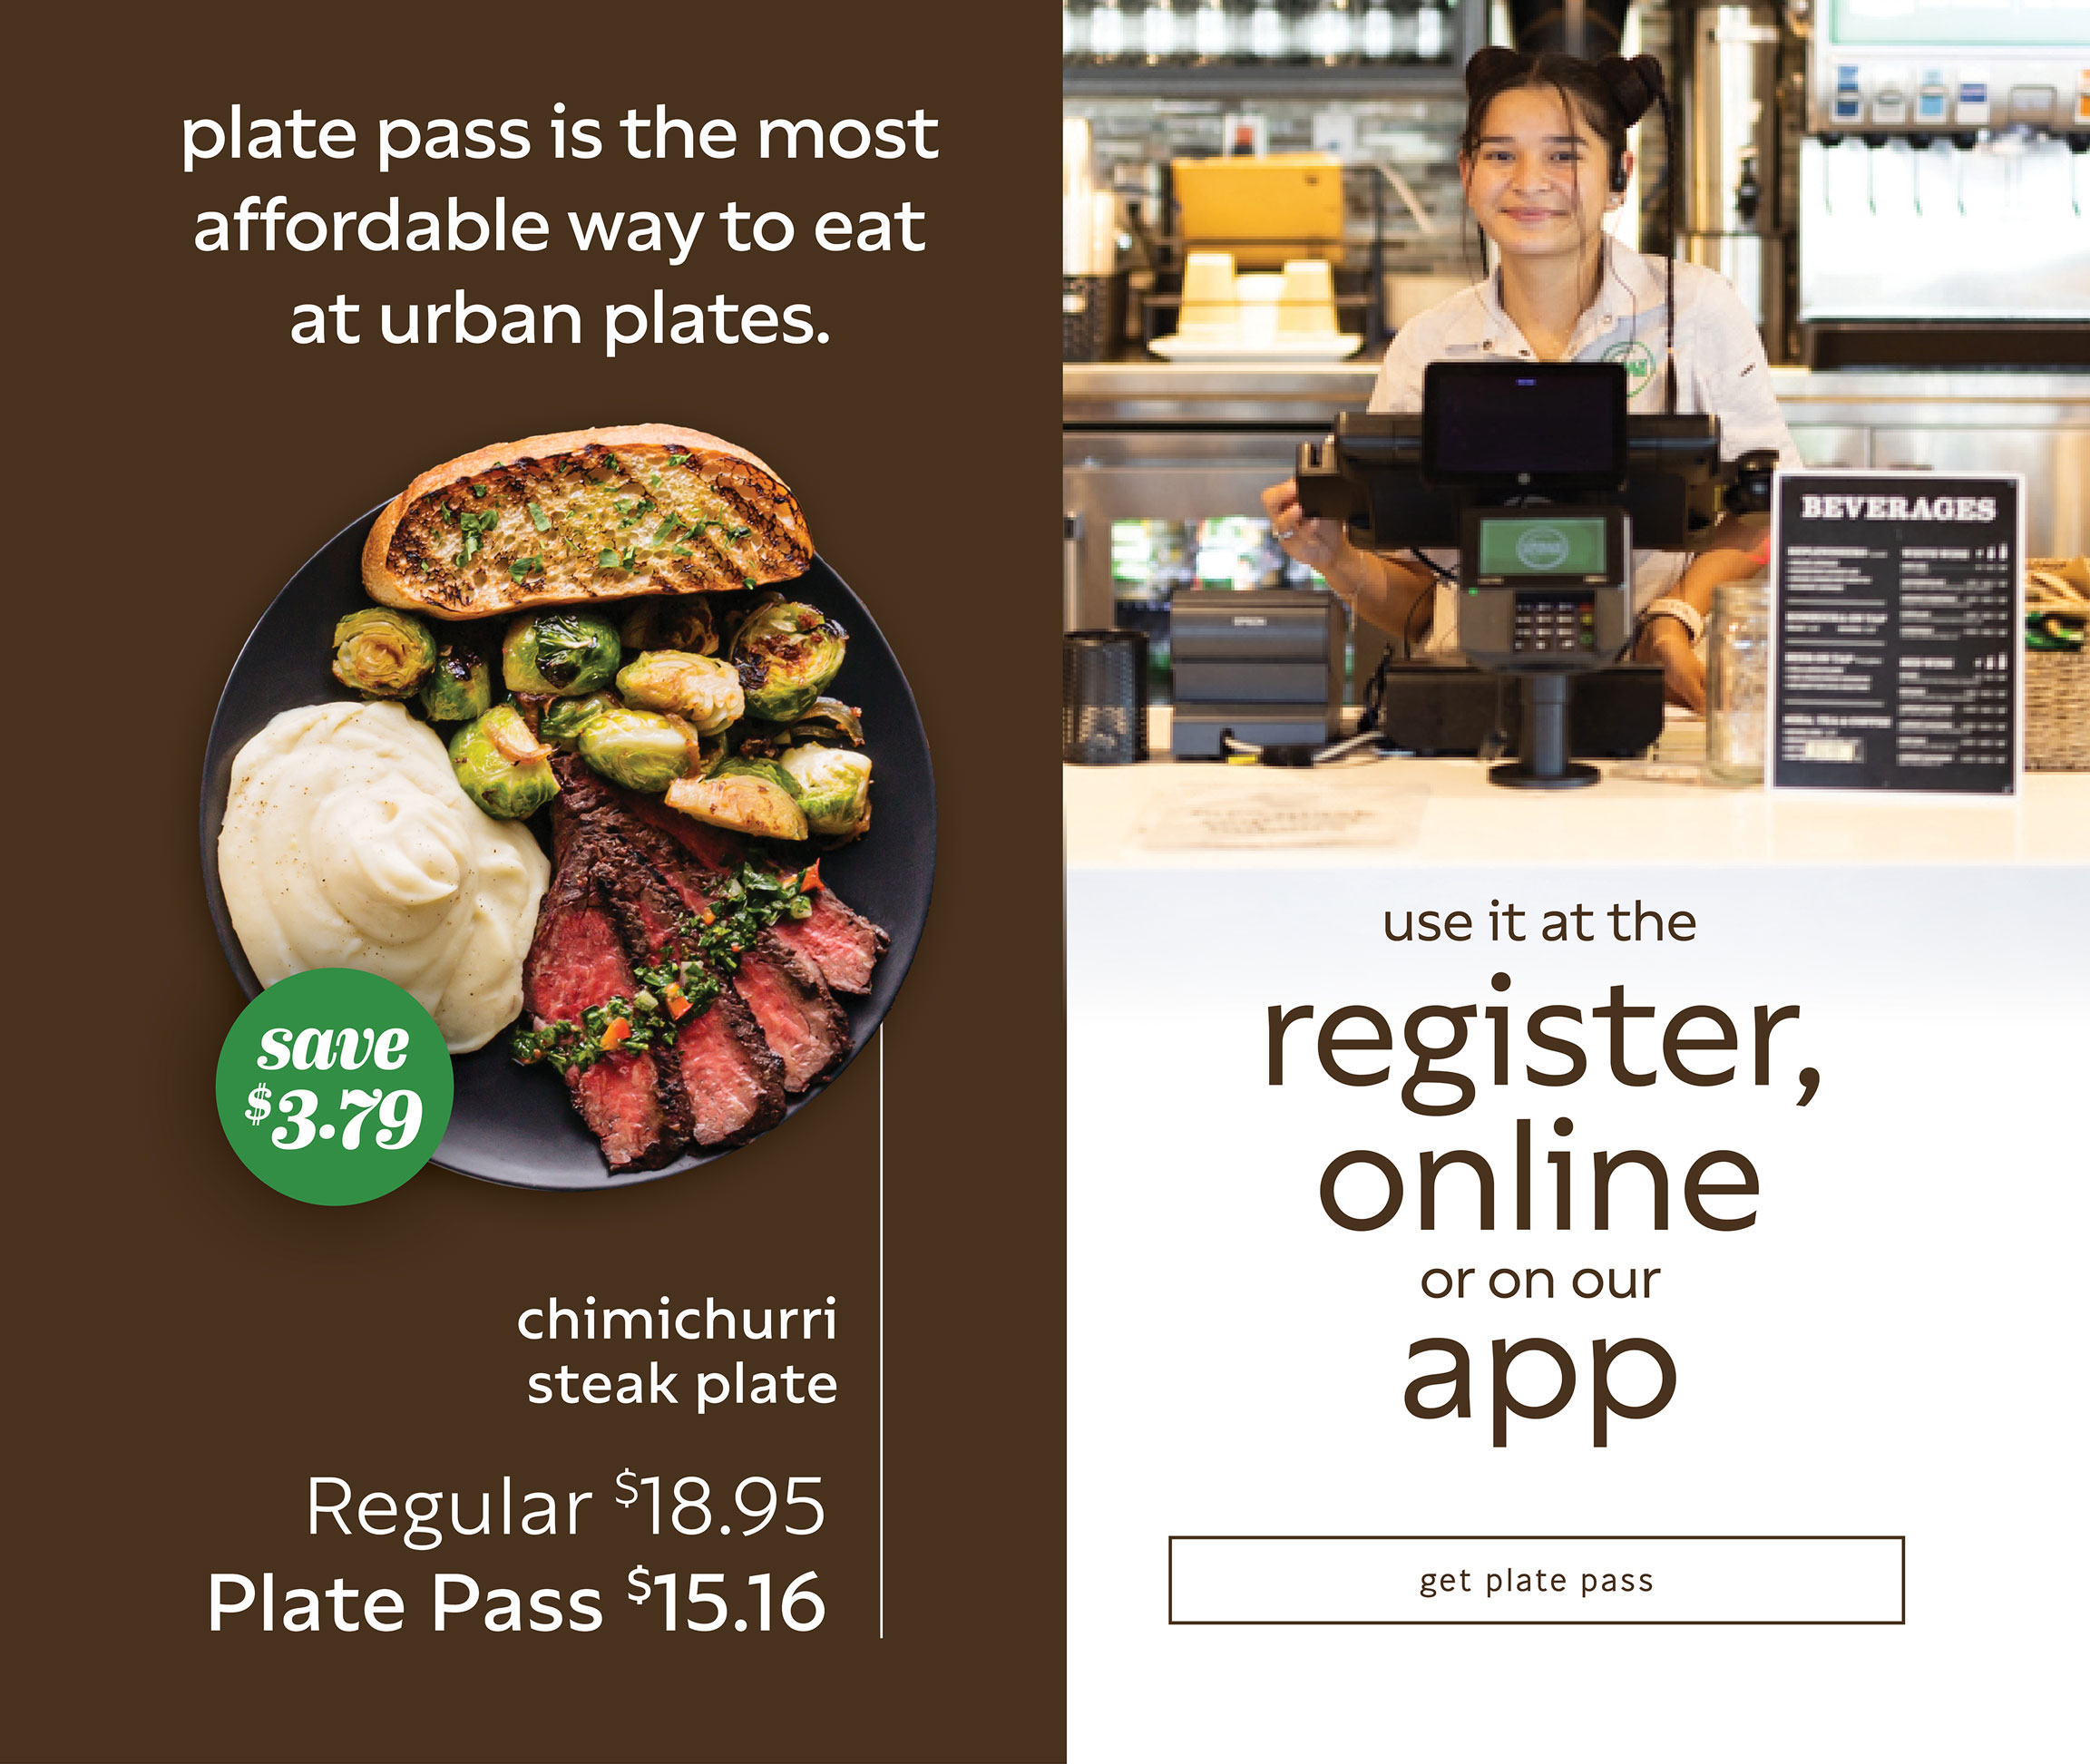 Plate Pass is the most affordable way to eat at Urban Plates